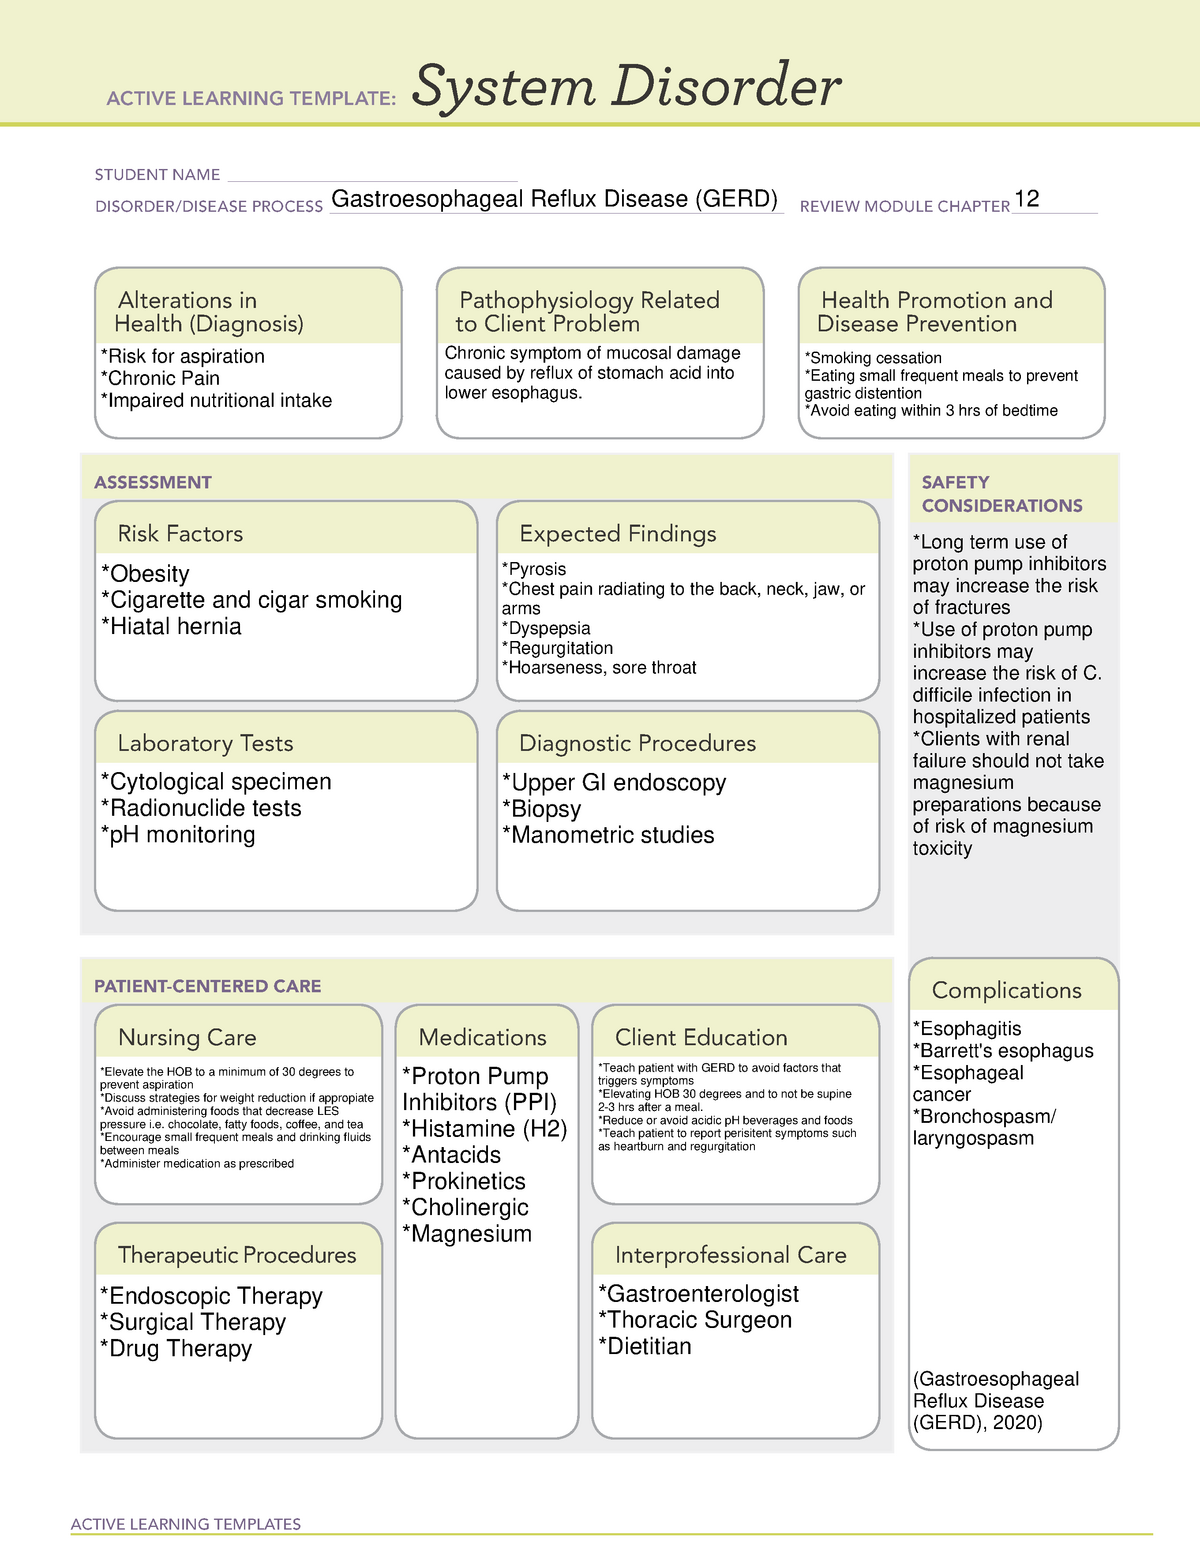 System Disorder GERD ati template ACTIVE LEARNING TEMPLATES System